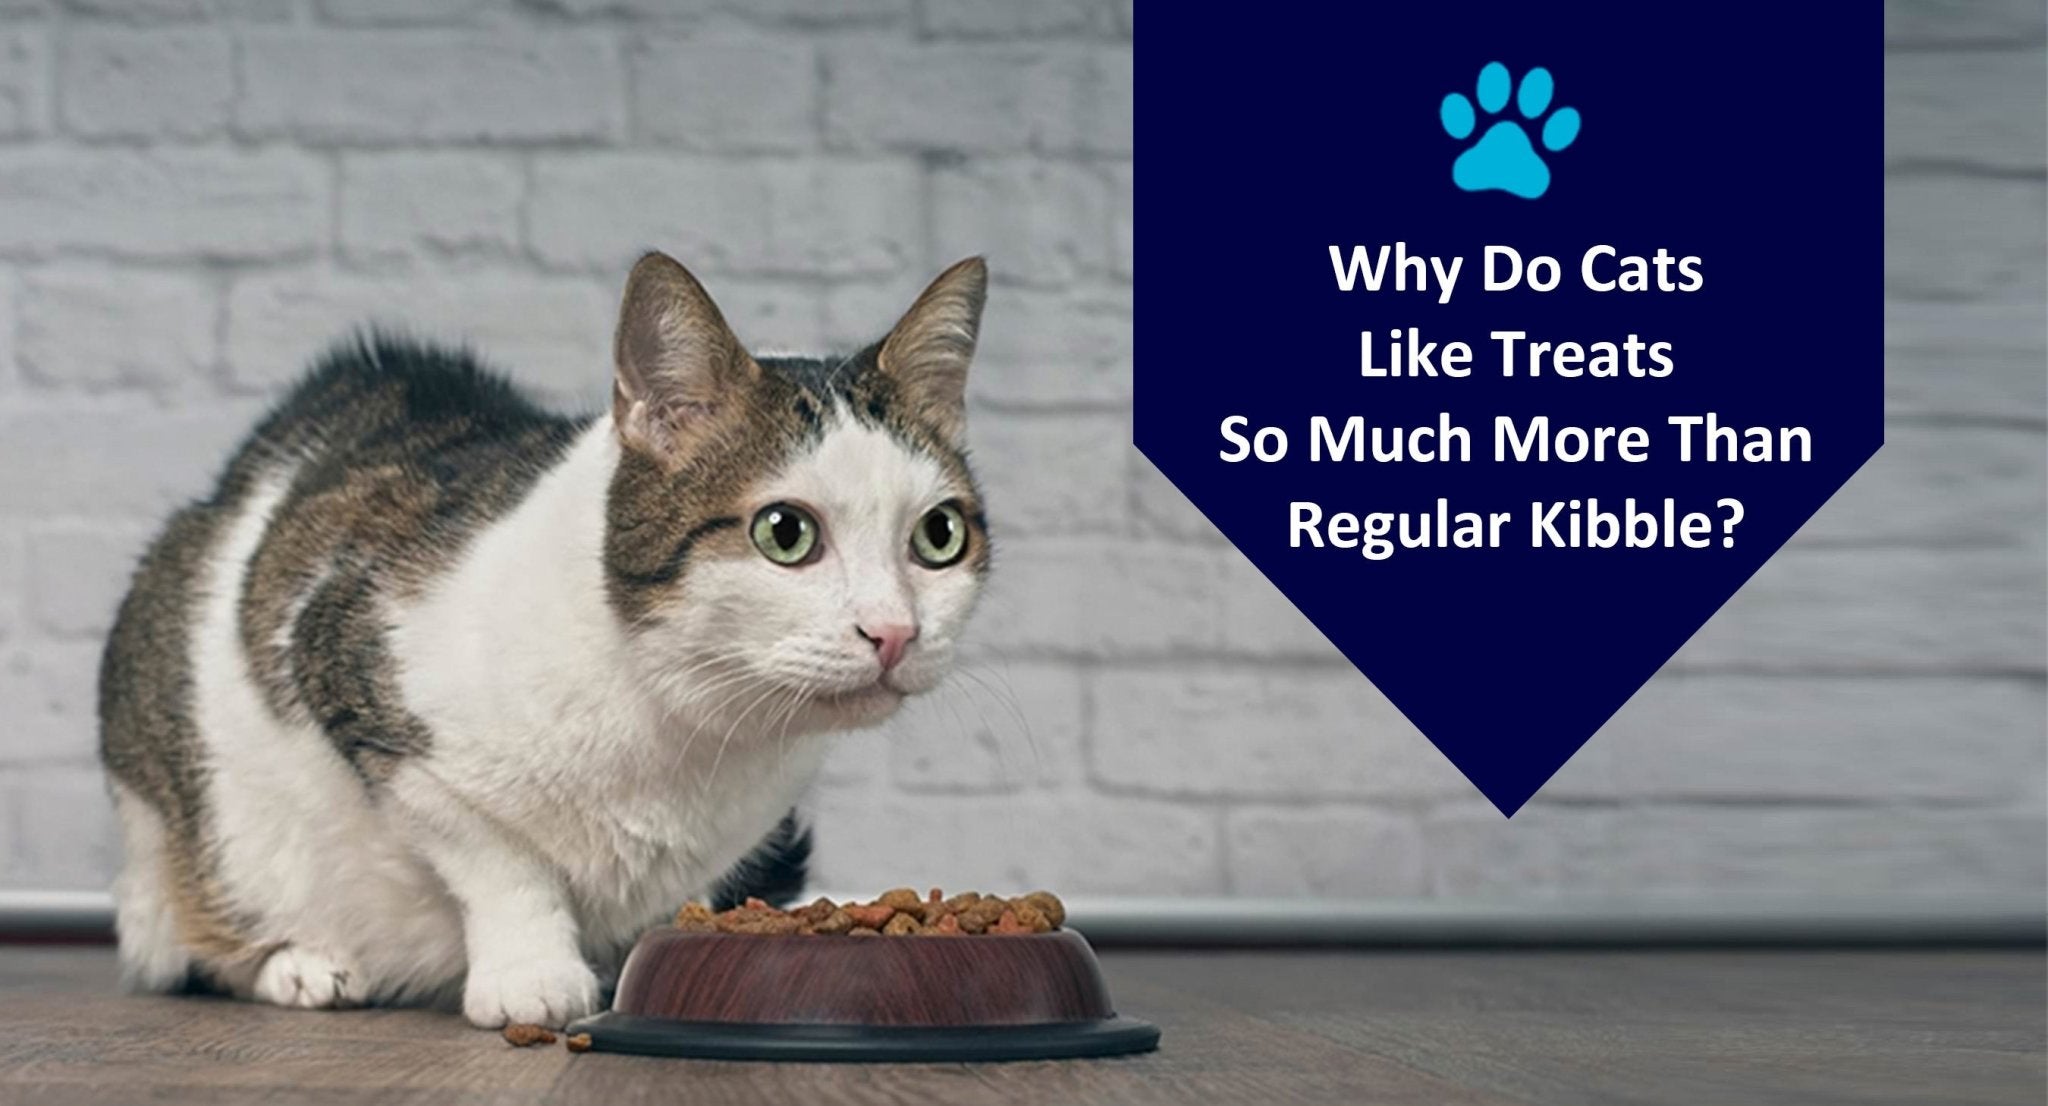 Why Do Cats Like Treats So Much More Than Regular Kibble?